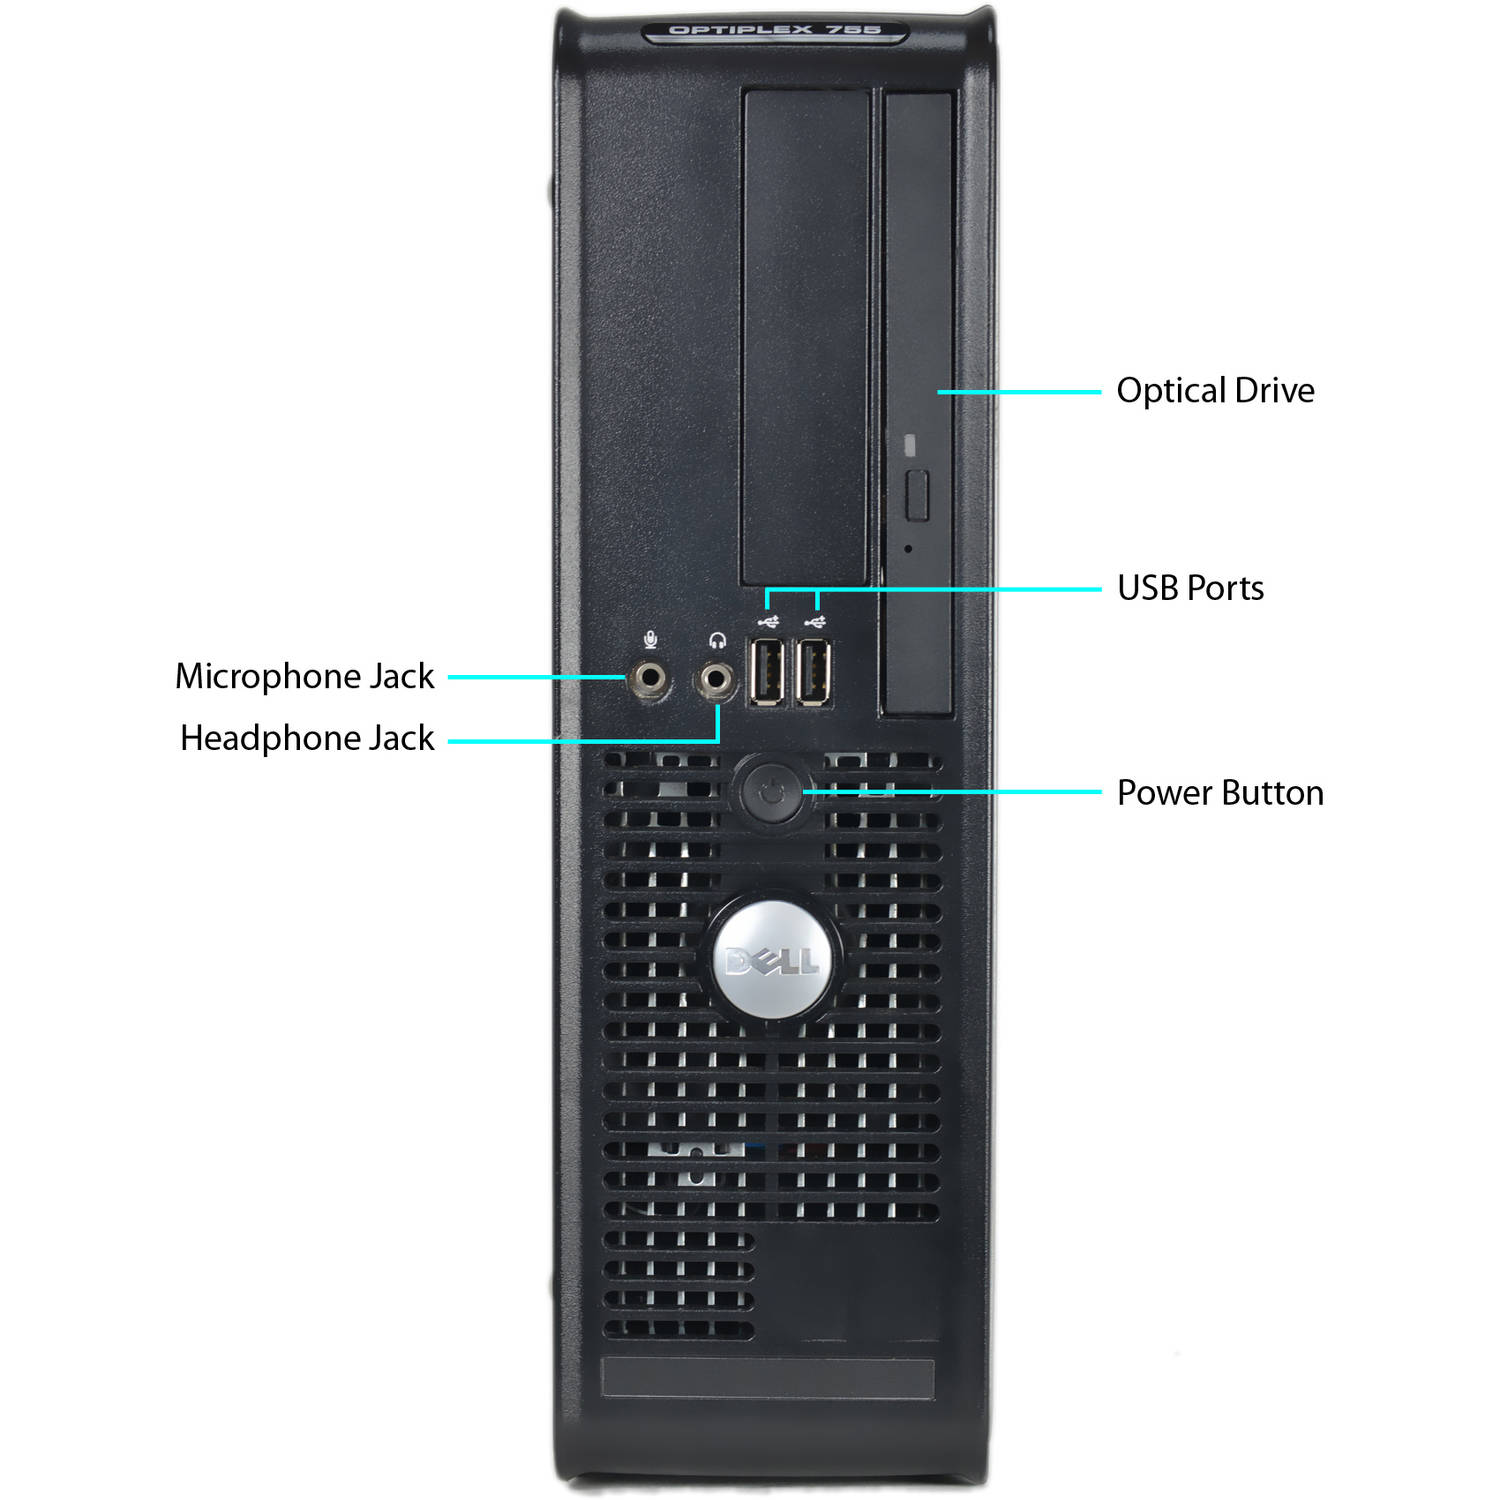 Restored Dell Small Form Factor Desktop PC with Intel Core 2 Duo Processor, 4GB Memory, 250GB Hard Drive DVD Wi-Fi and Windows 10 Home (Refurbished) - image 2 of 5